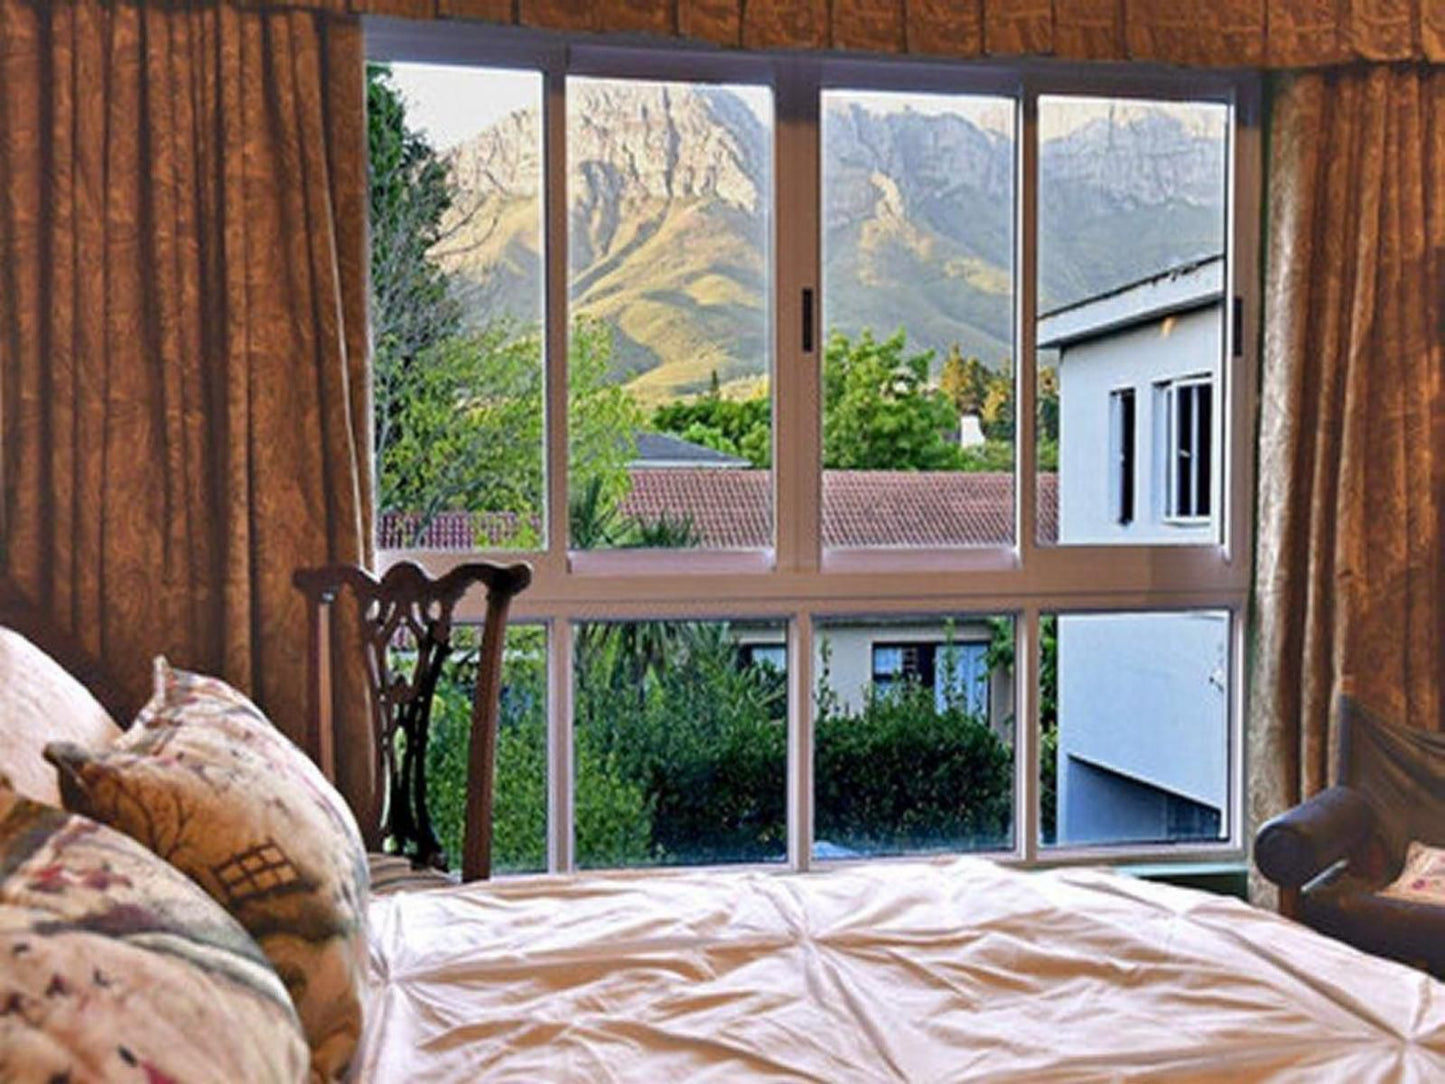 House Of Visconti Morningside Ct Somerset West Western Cape South Africa 